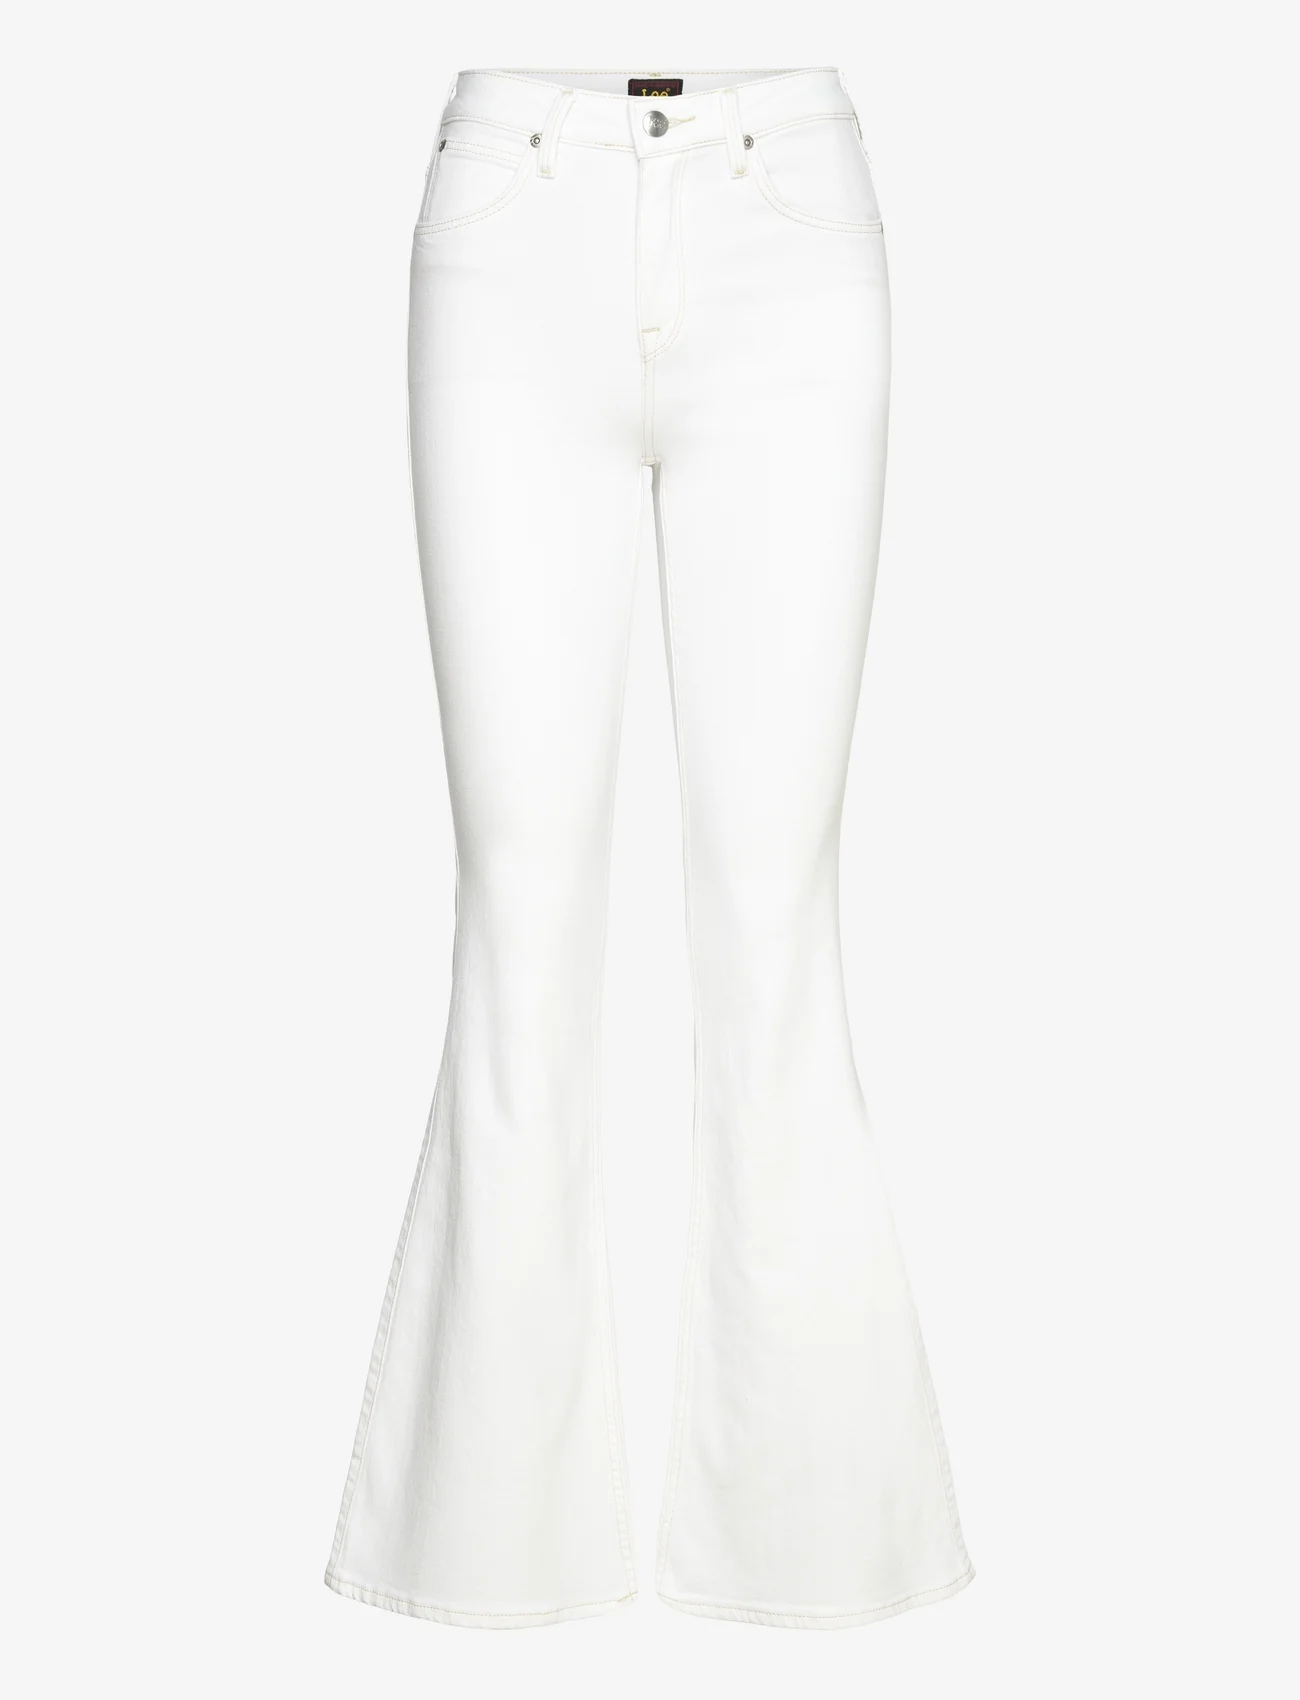 Lee Jeans - BREESE - flared jeans - illuminated white - 0